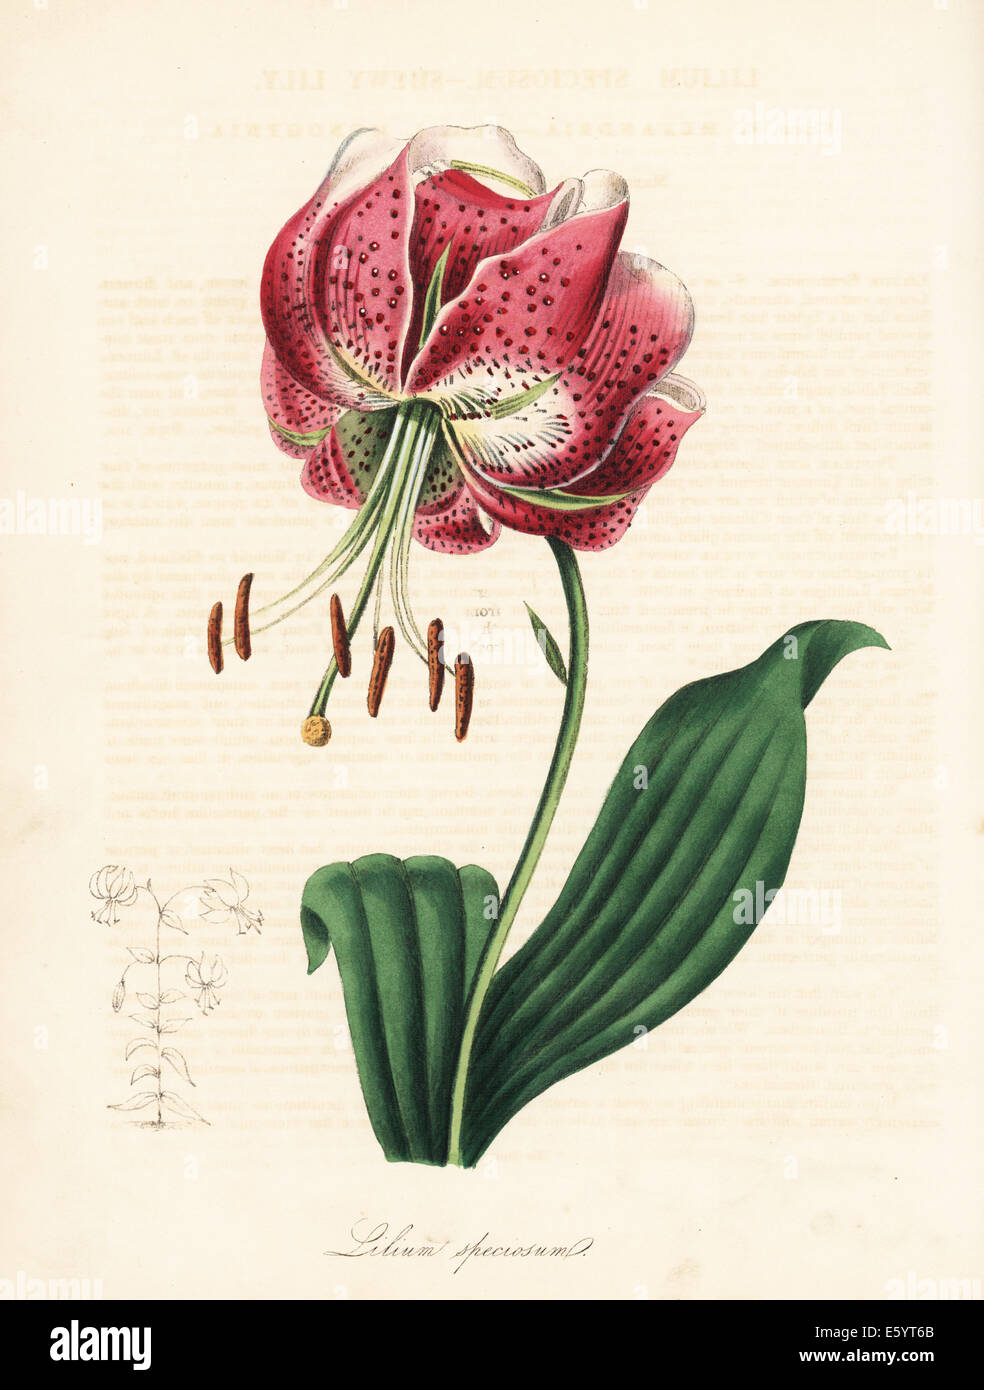 Shewy lily or Japanese lily, Lilium speciosum. Stock Photo